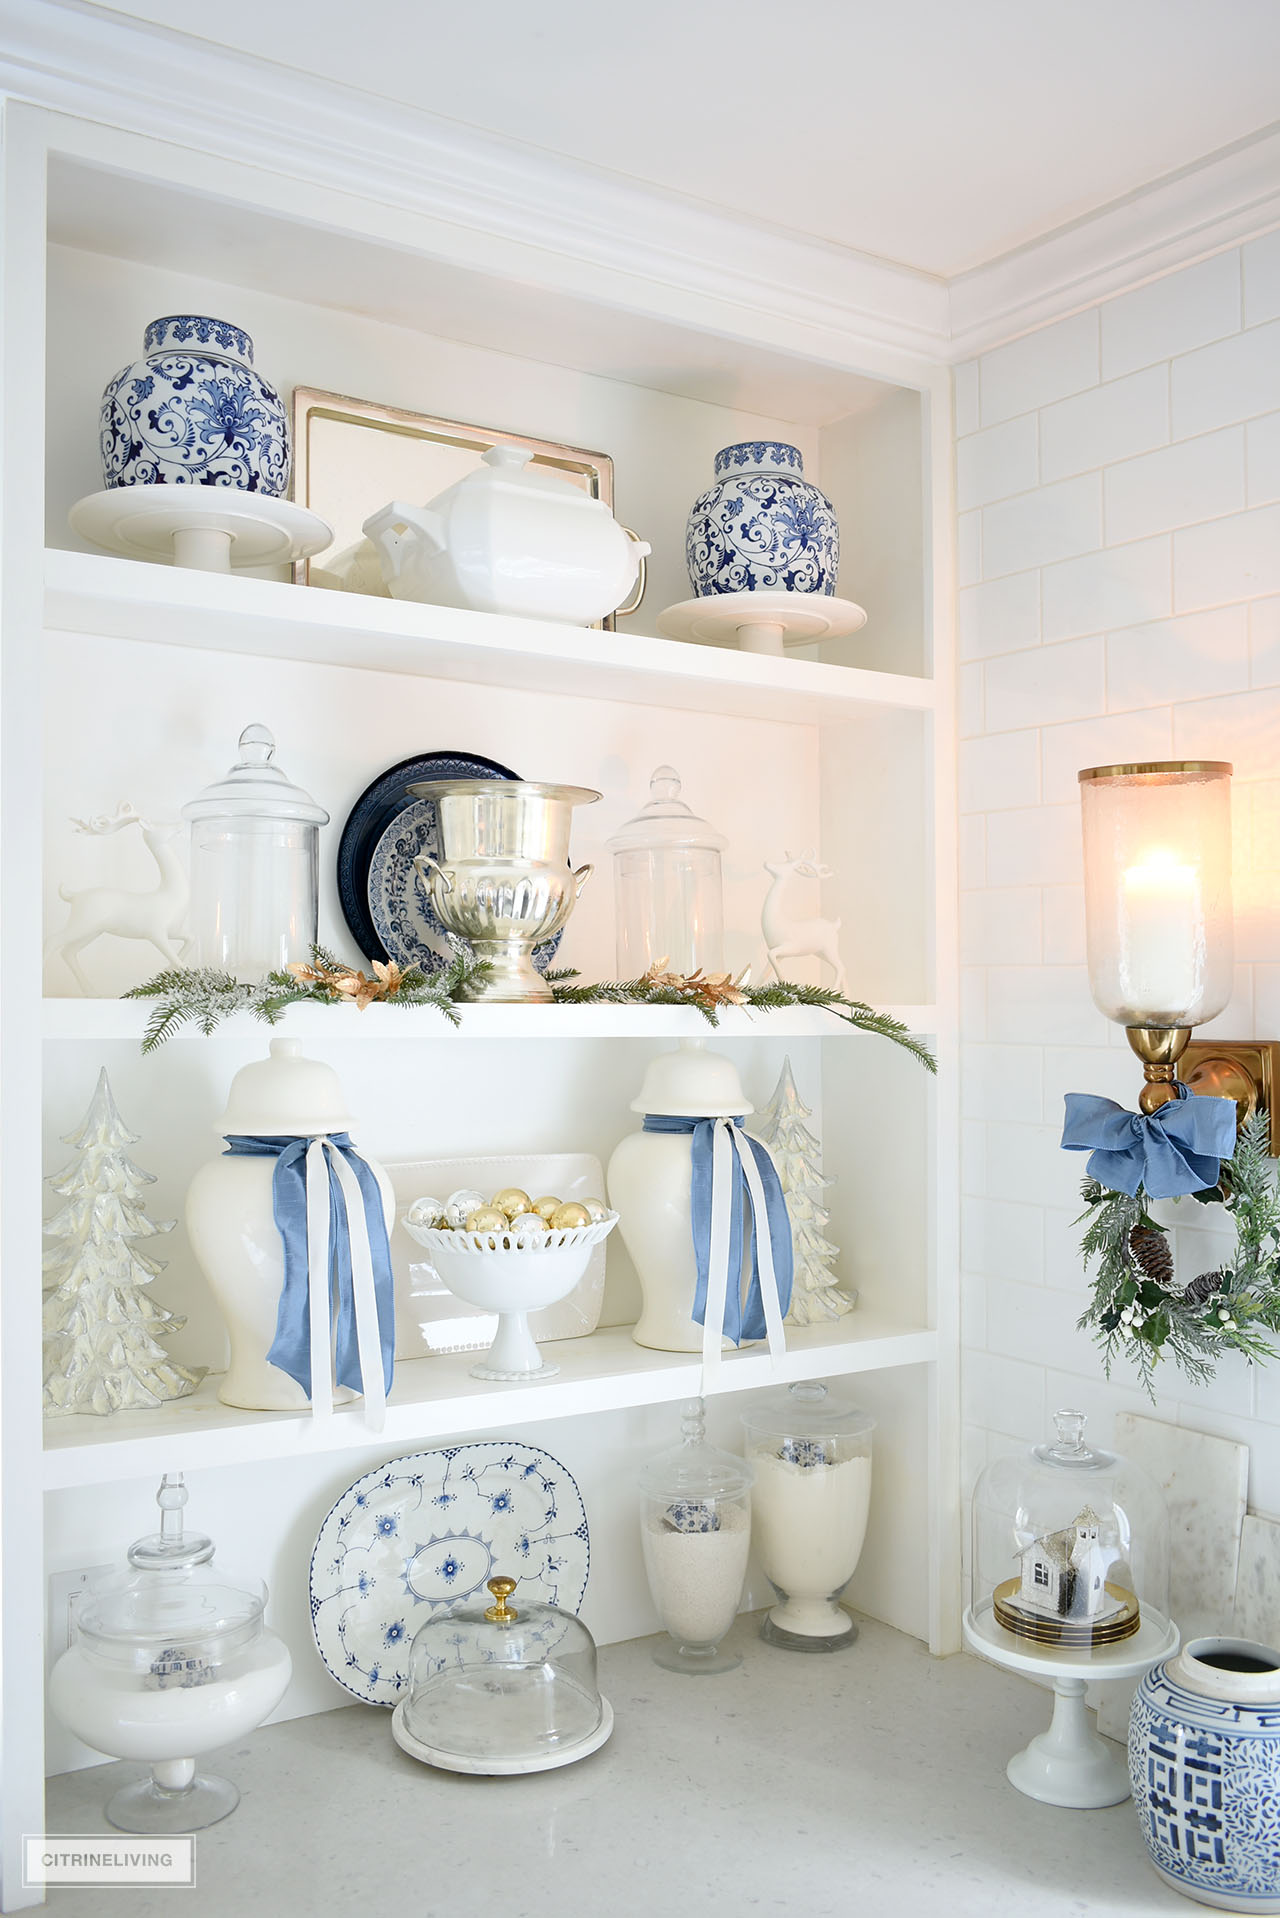 Open builtin kitchen shelves styled for Christmas with blue, white, greenery and gold touches.